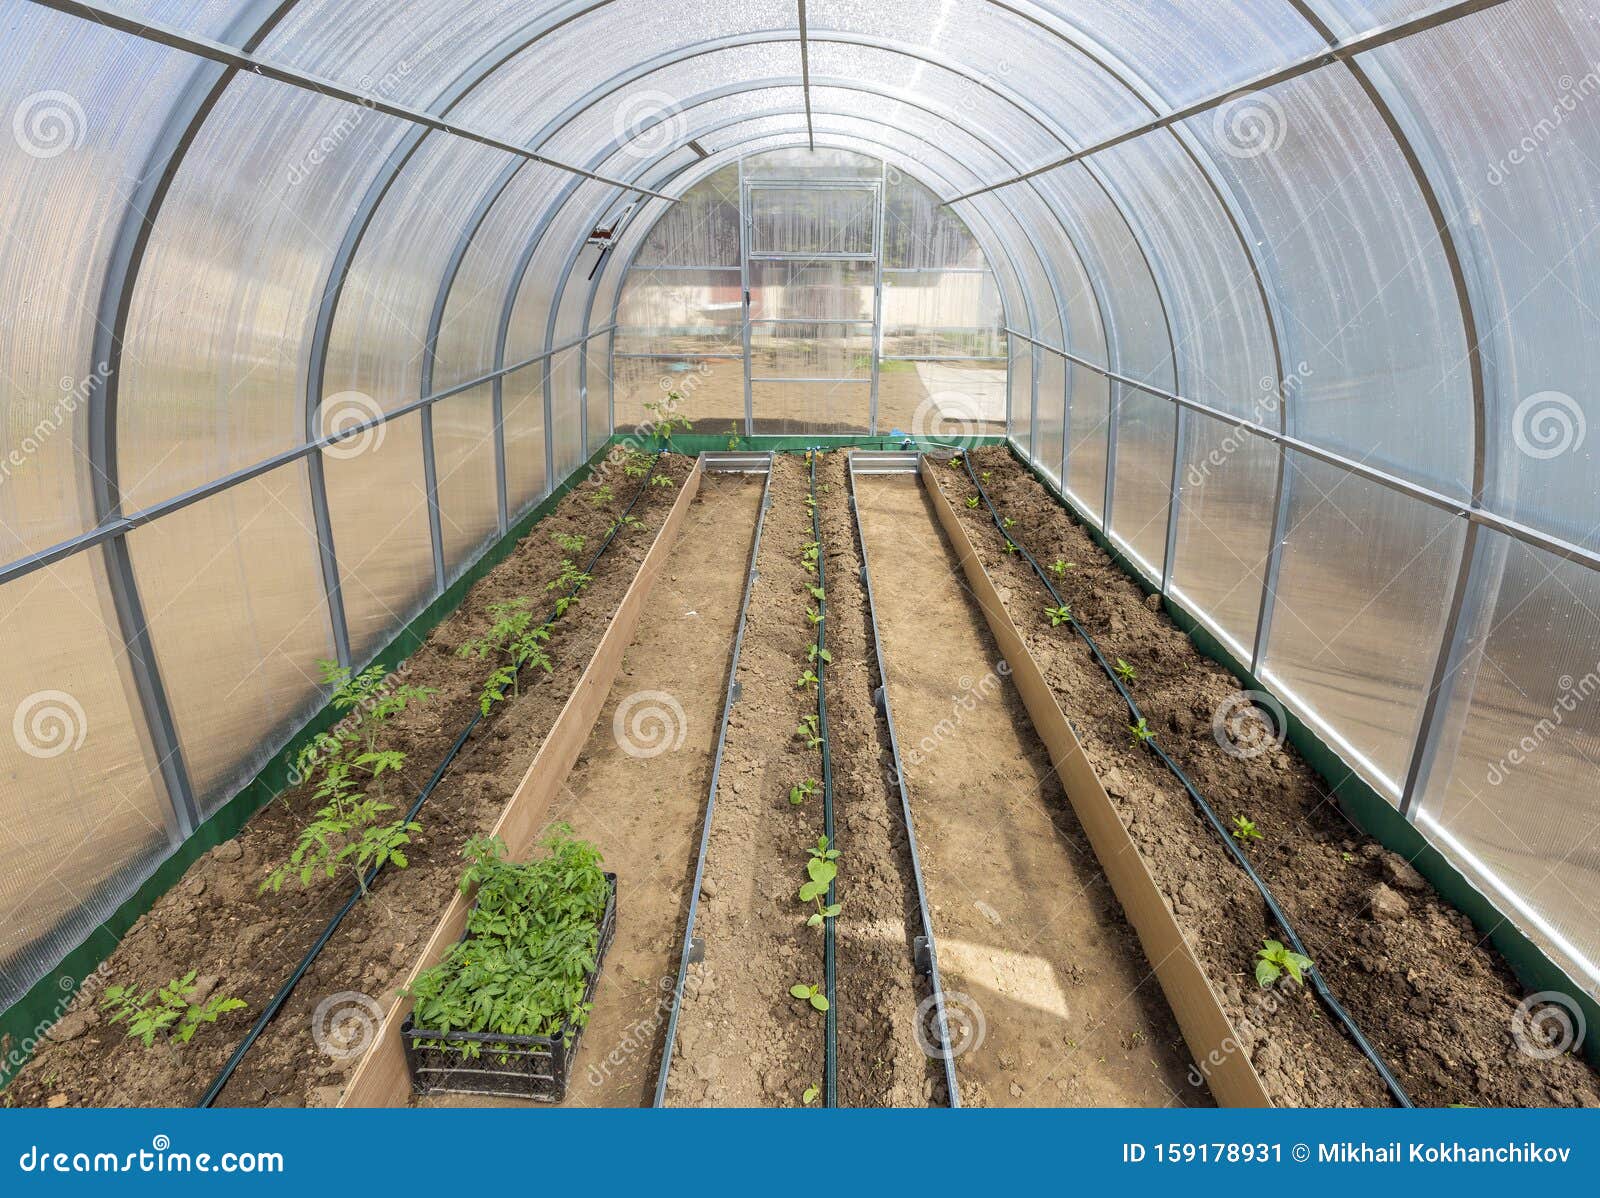 vegetables in greenhouse drip irrigation